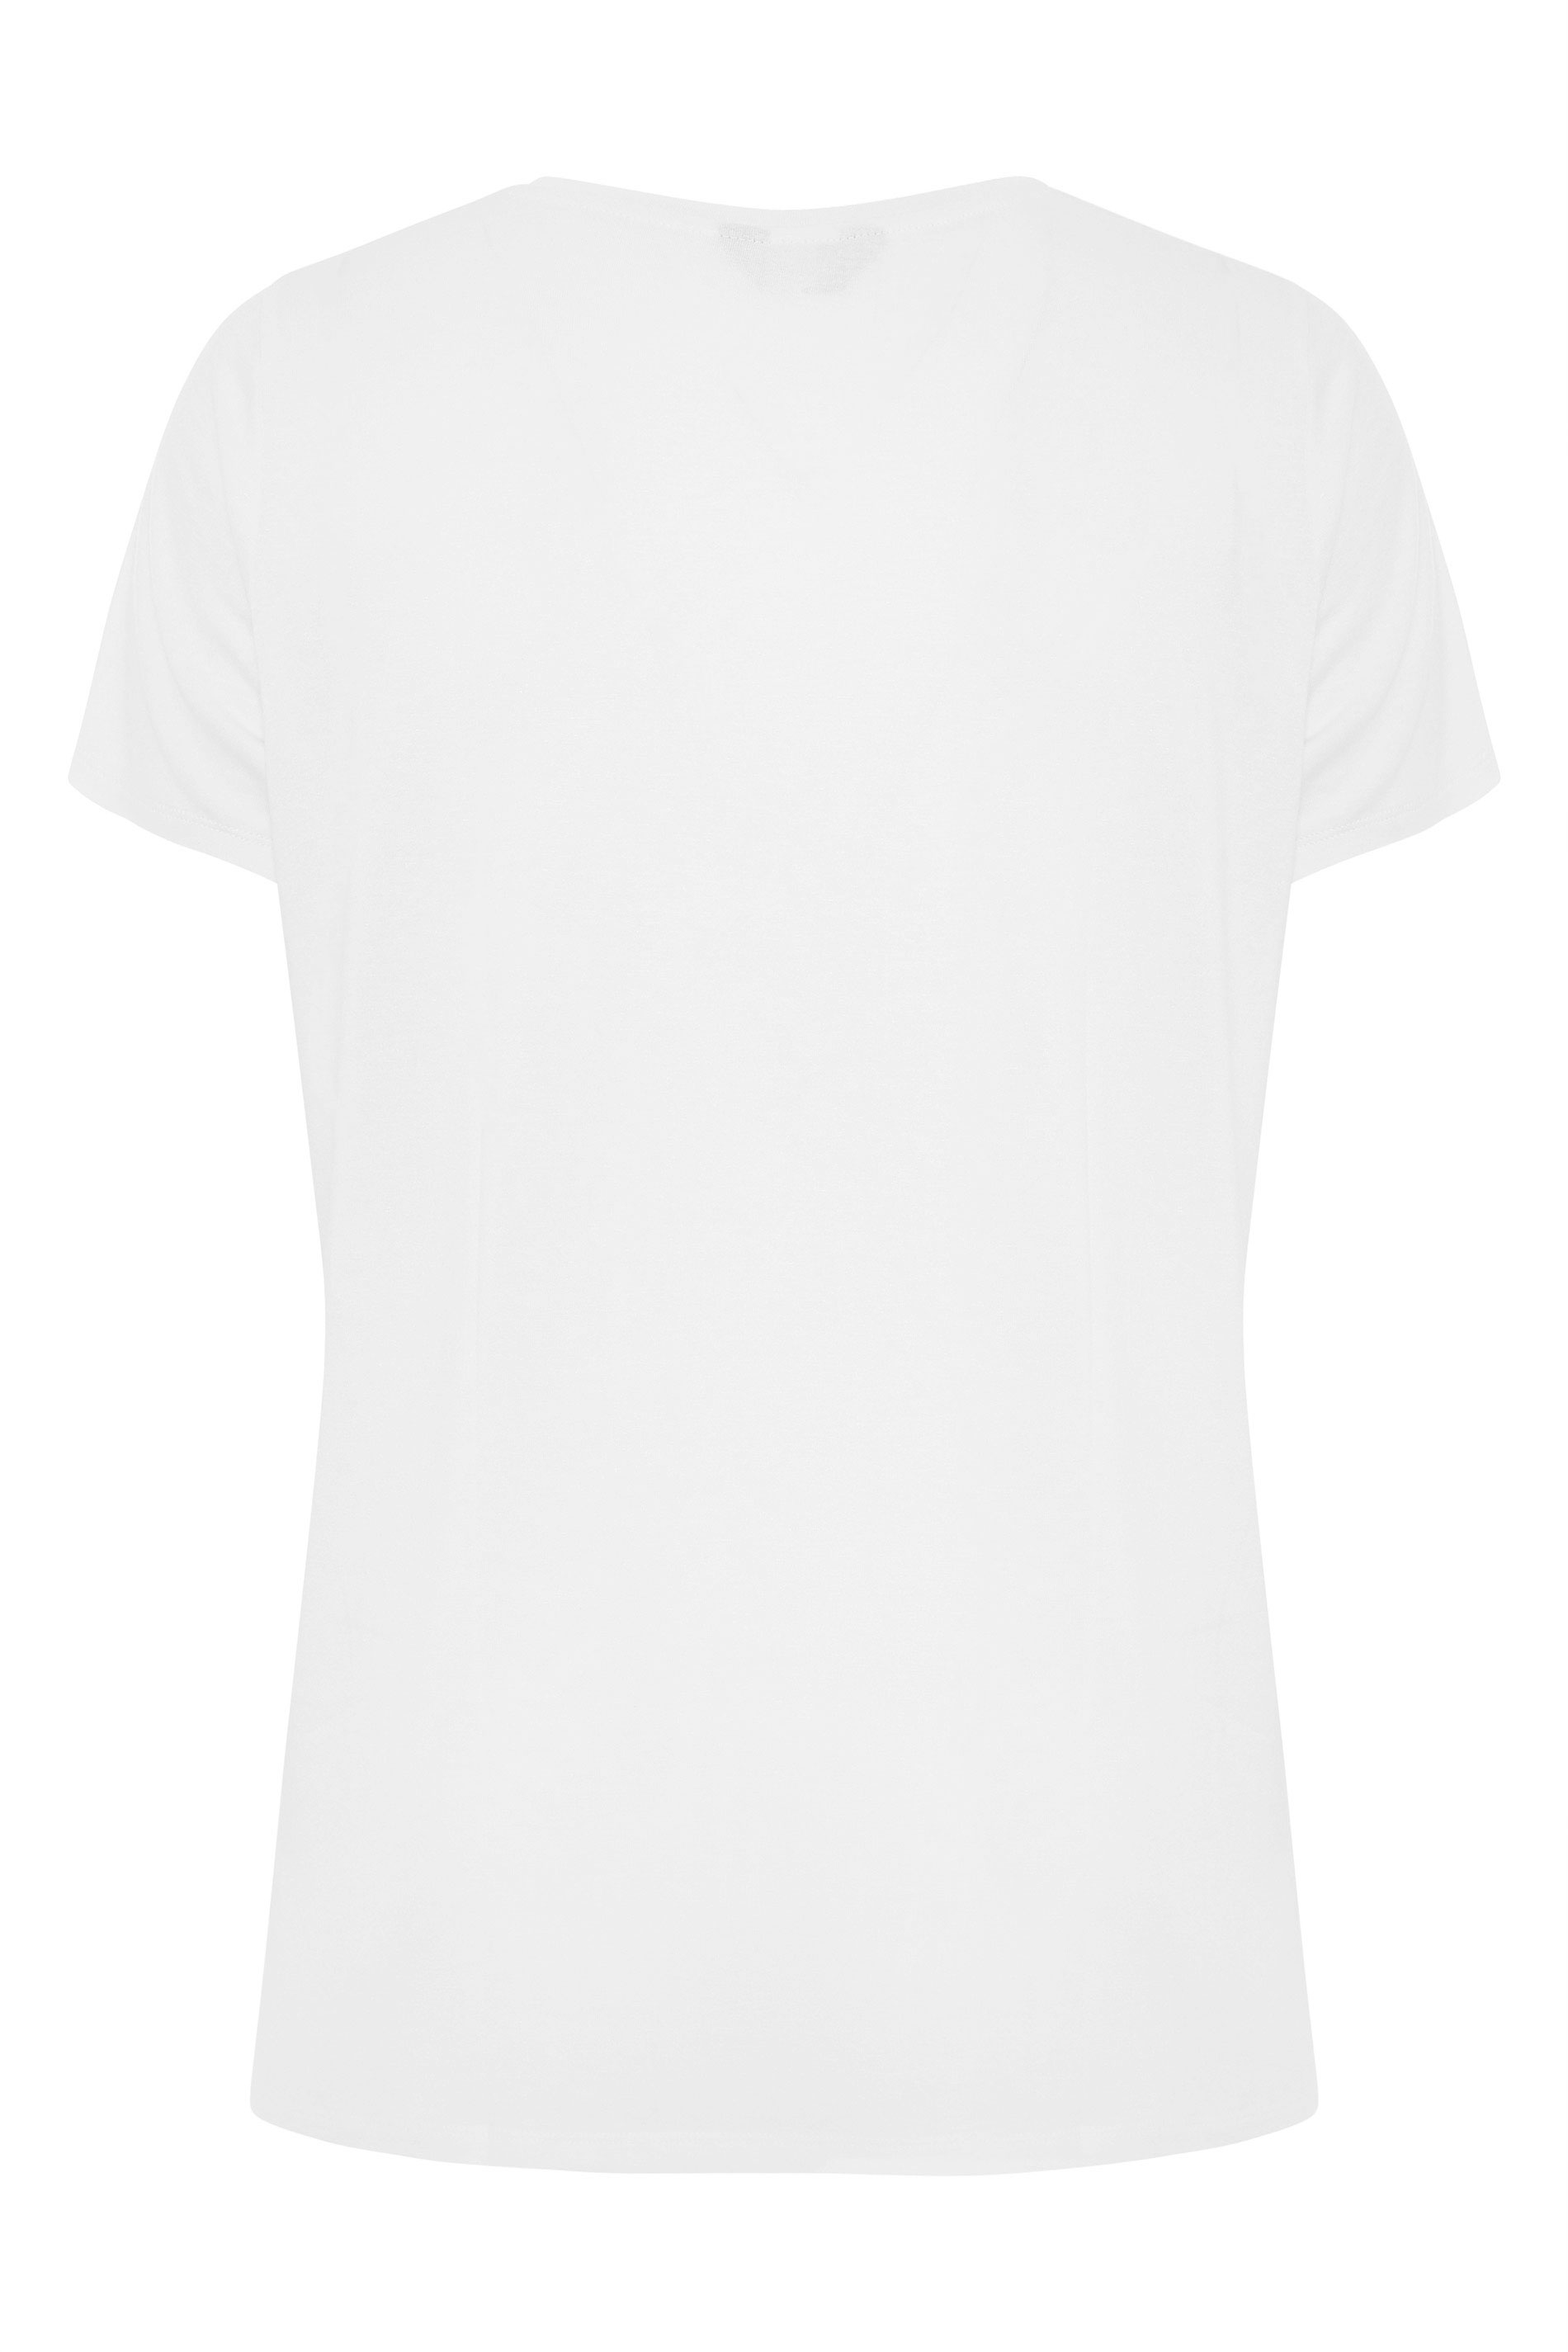 Grande taille  Tops Grande taille  Tops Casual | T-Shirt Blanc Slogan 'Made With Love' - CP04095